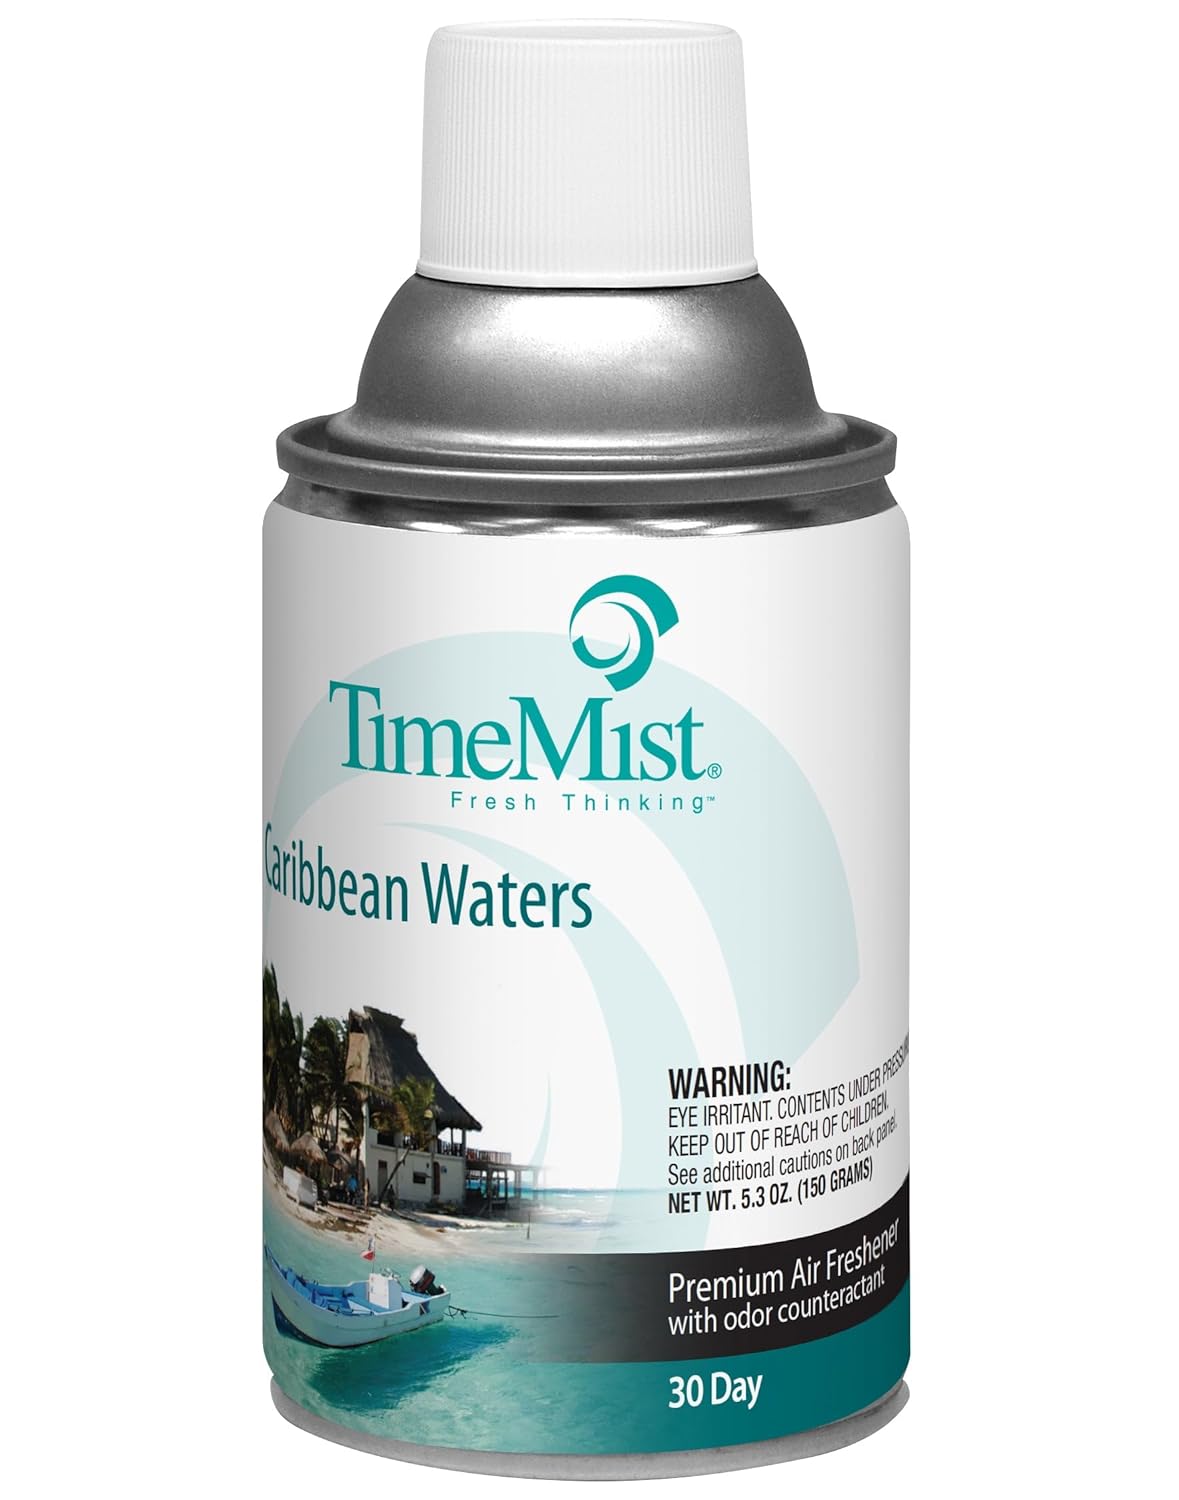 TimeMist Premium Metered Air Freshener Refills - Caribbean Waters - 7.1 oz (Case of 12) - 1042756 - Lasts Up To 30 Days and Neutralizes Tough Odors